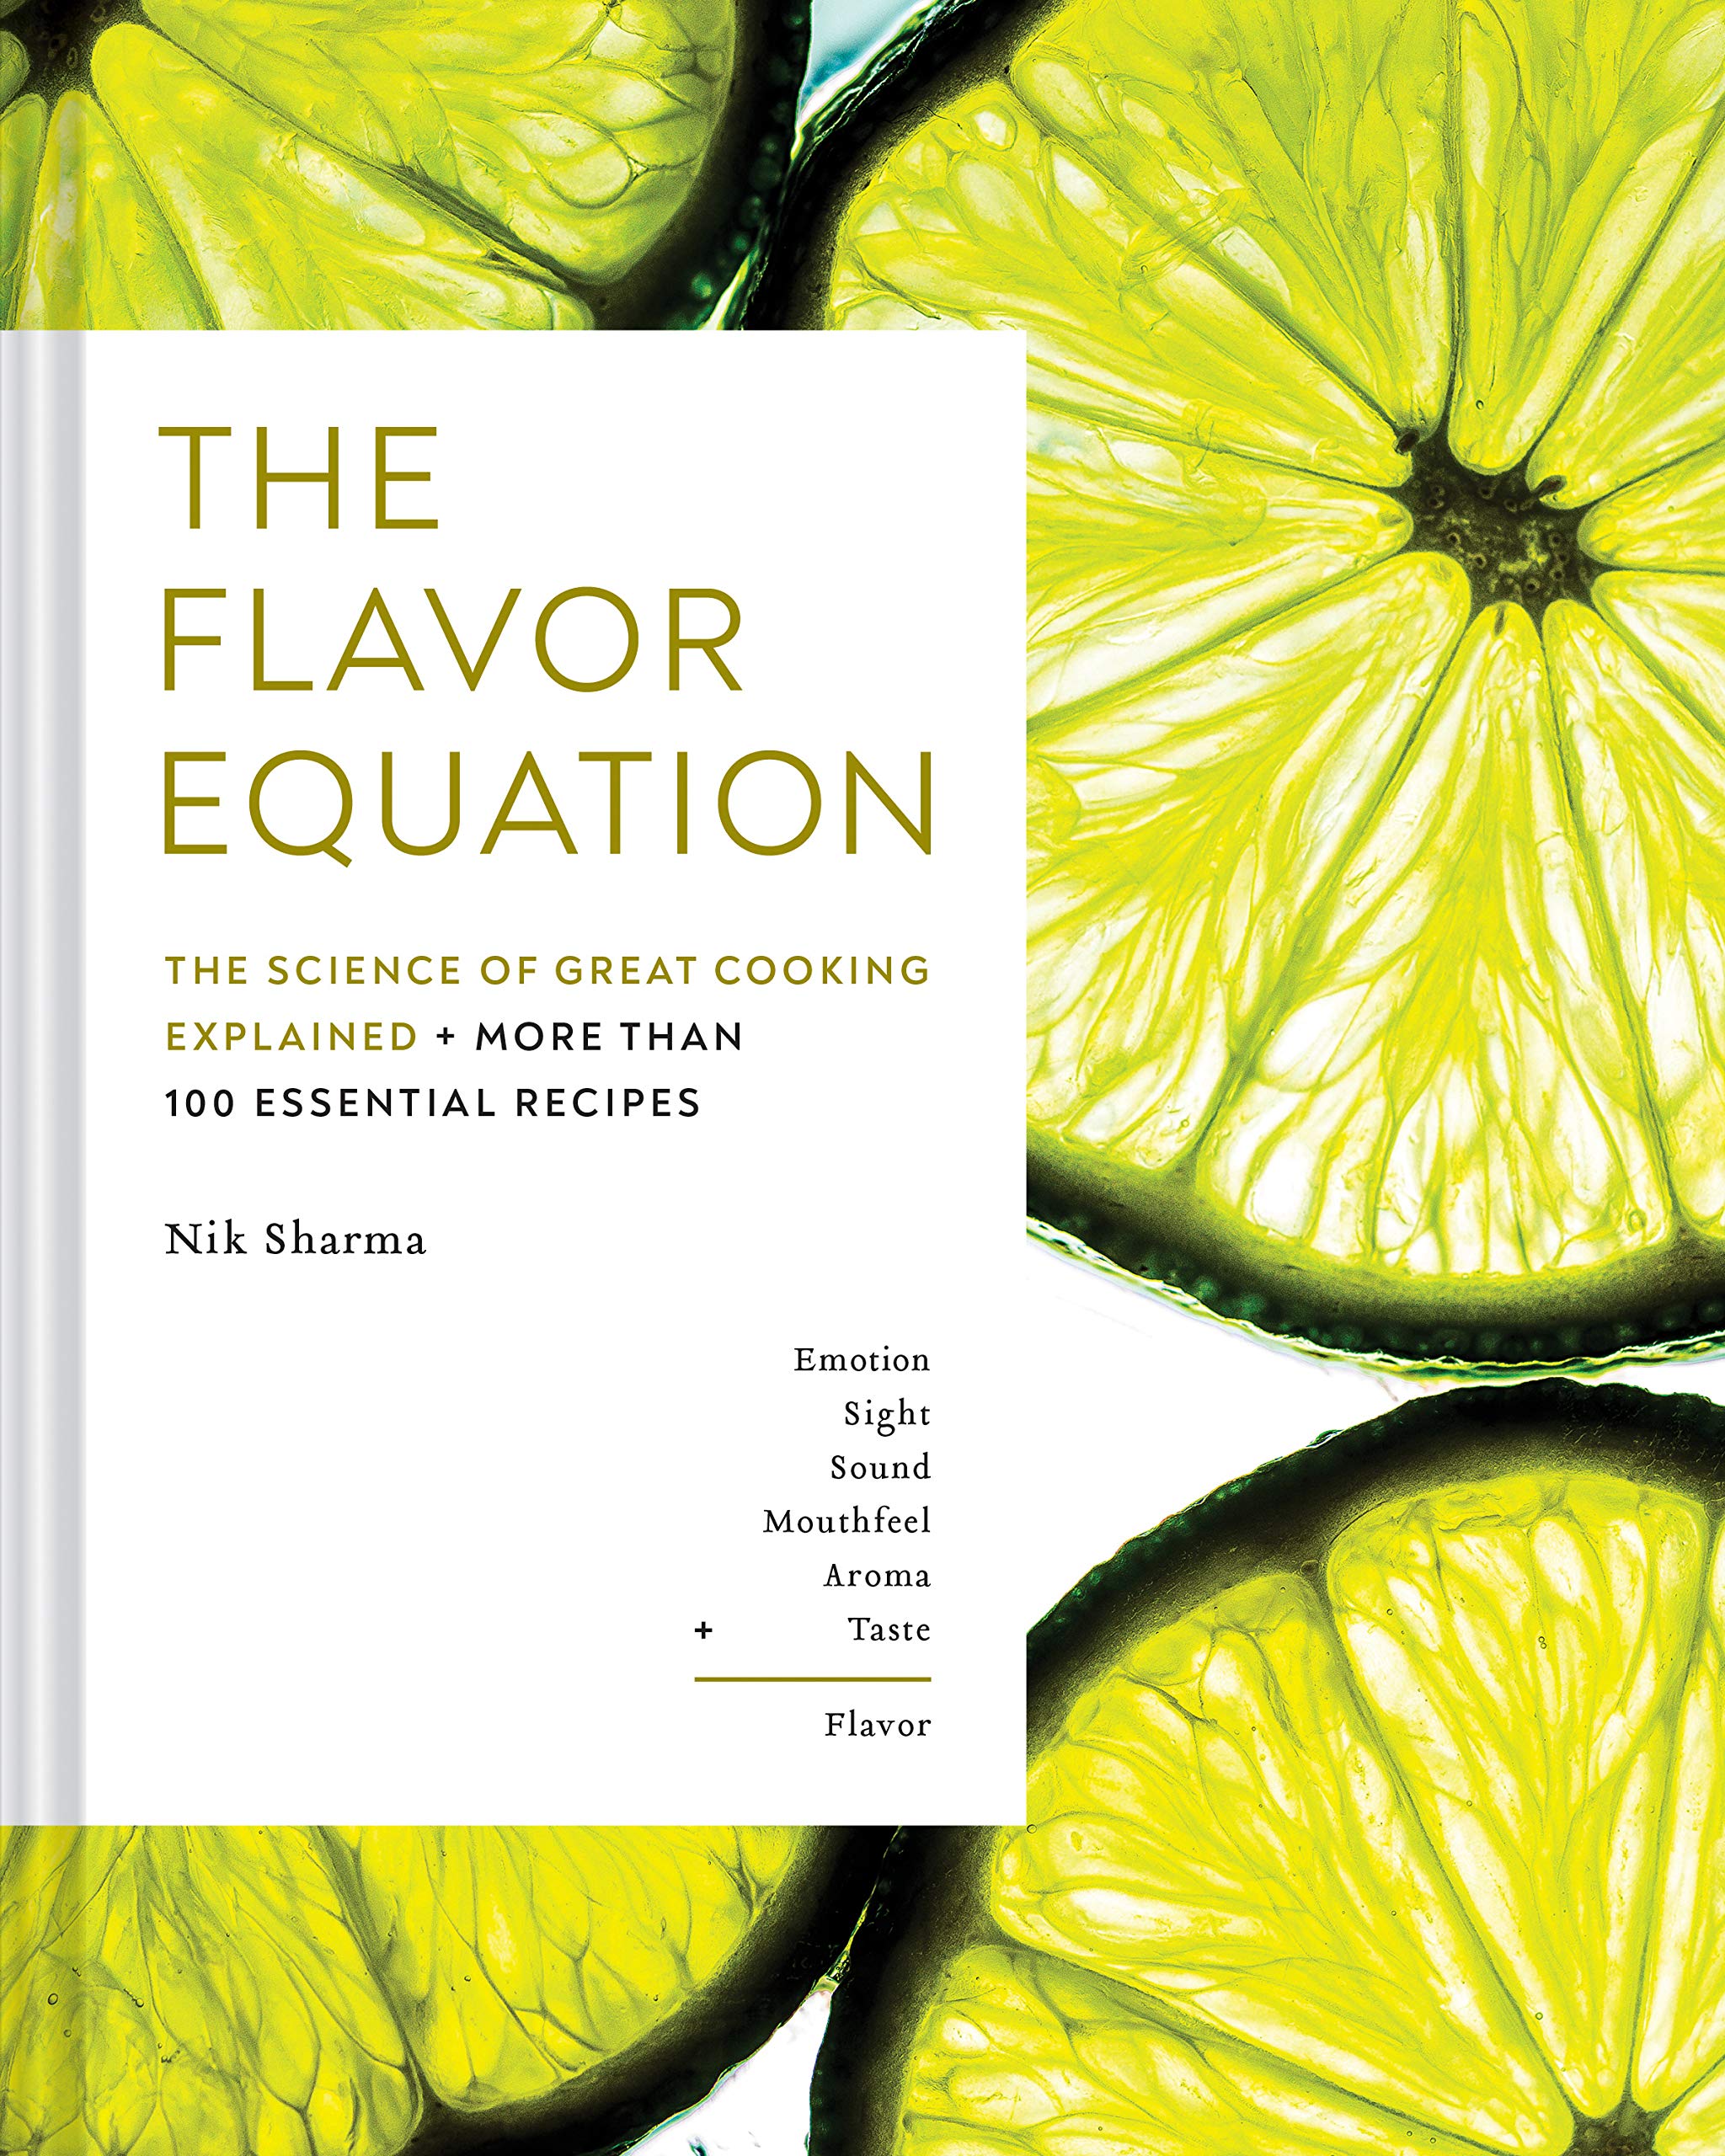 The Flavor Equation: The Science of Great Cooking Explained in More Than 100 Essential Recipes (Nik Sharma) *SIGNED*